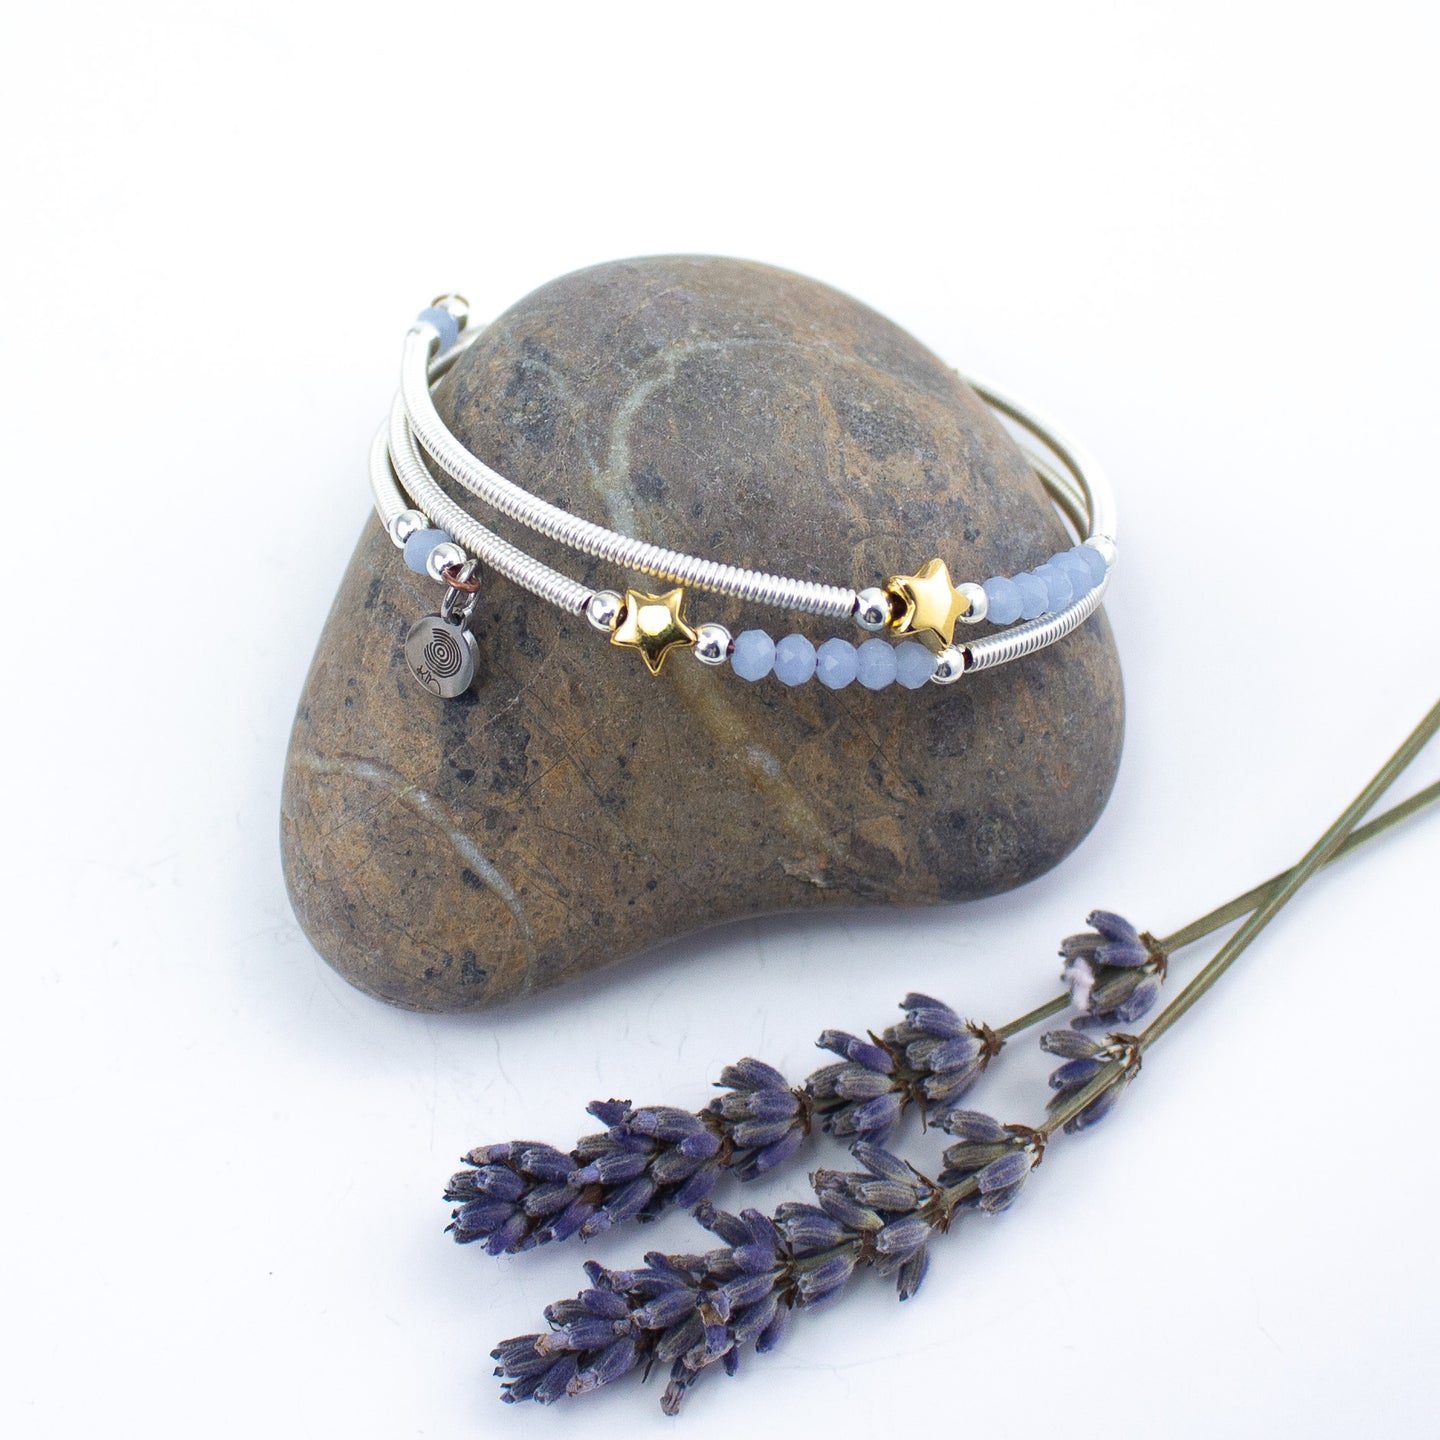 Hand wrapped silver filled tubes, blue crystal and gold plate star wrap around bracelet.  Bangle style bracelet, one size flexible that wraps around the wrist and sits in place.  Designed and Handmade in Dingle, Ireland.  